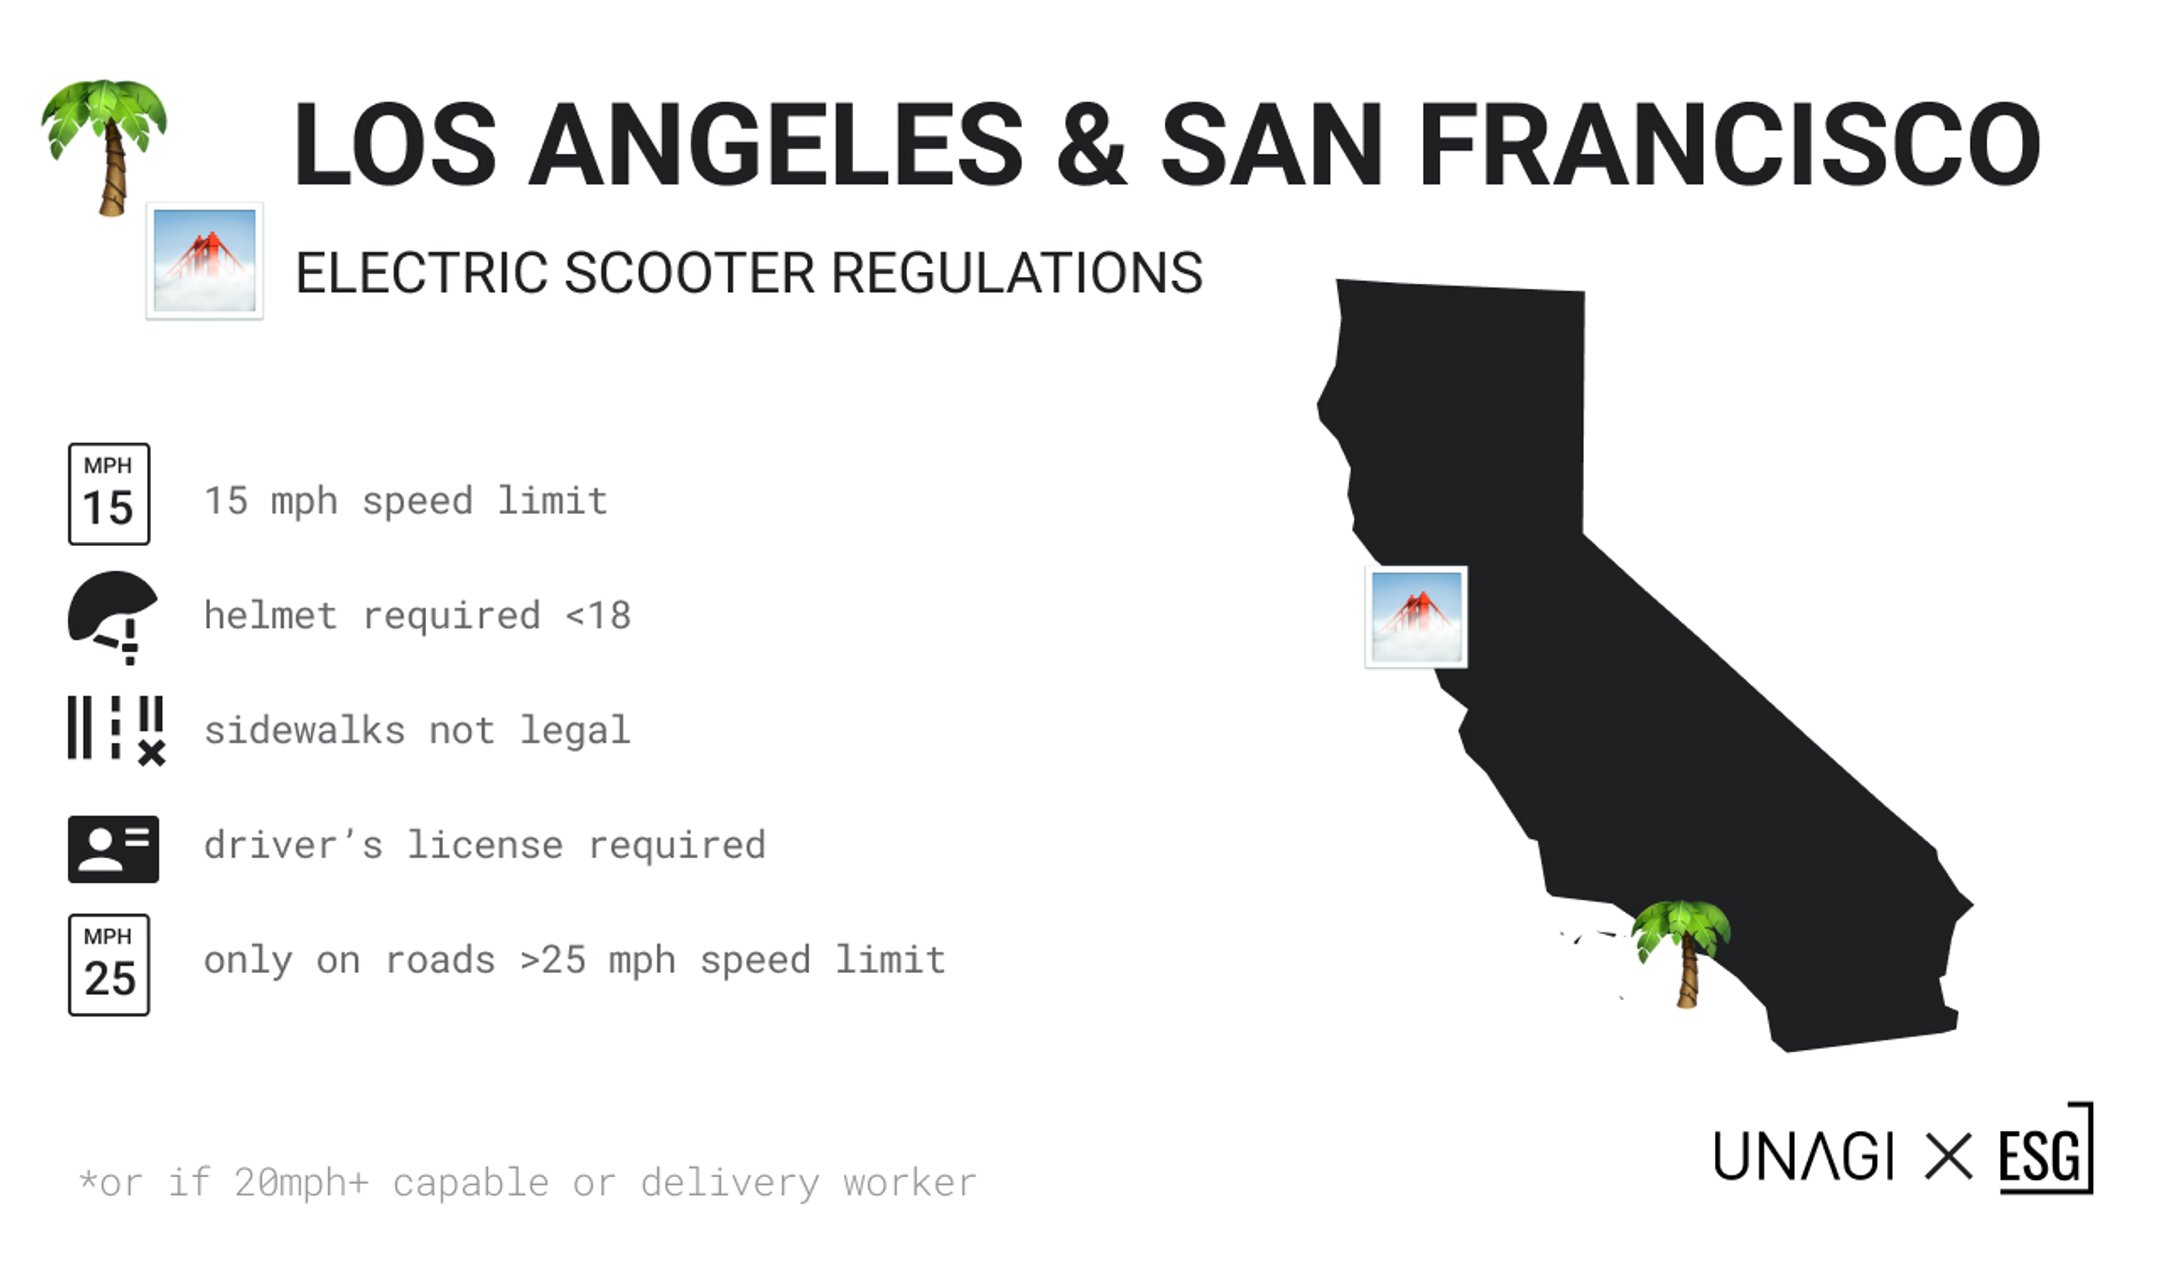 The 2022 Comprehensive Guide to Electric Scooter Laws